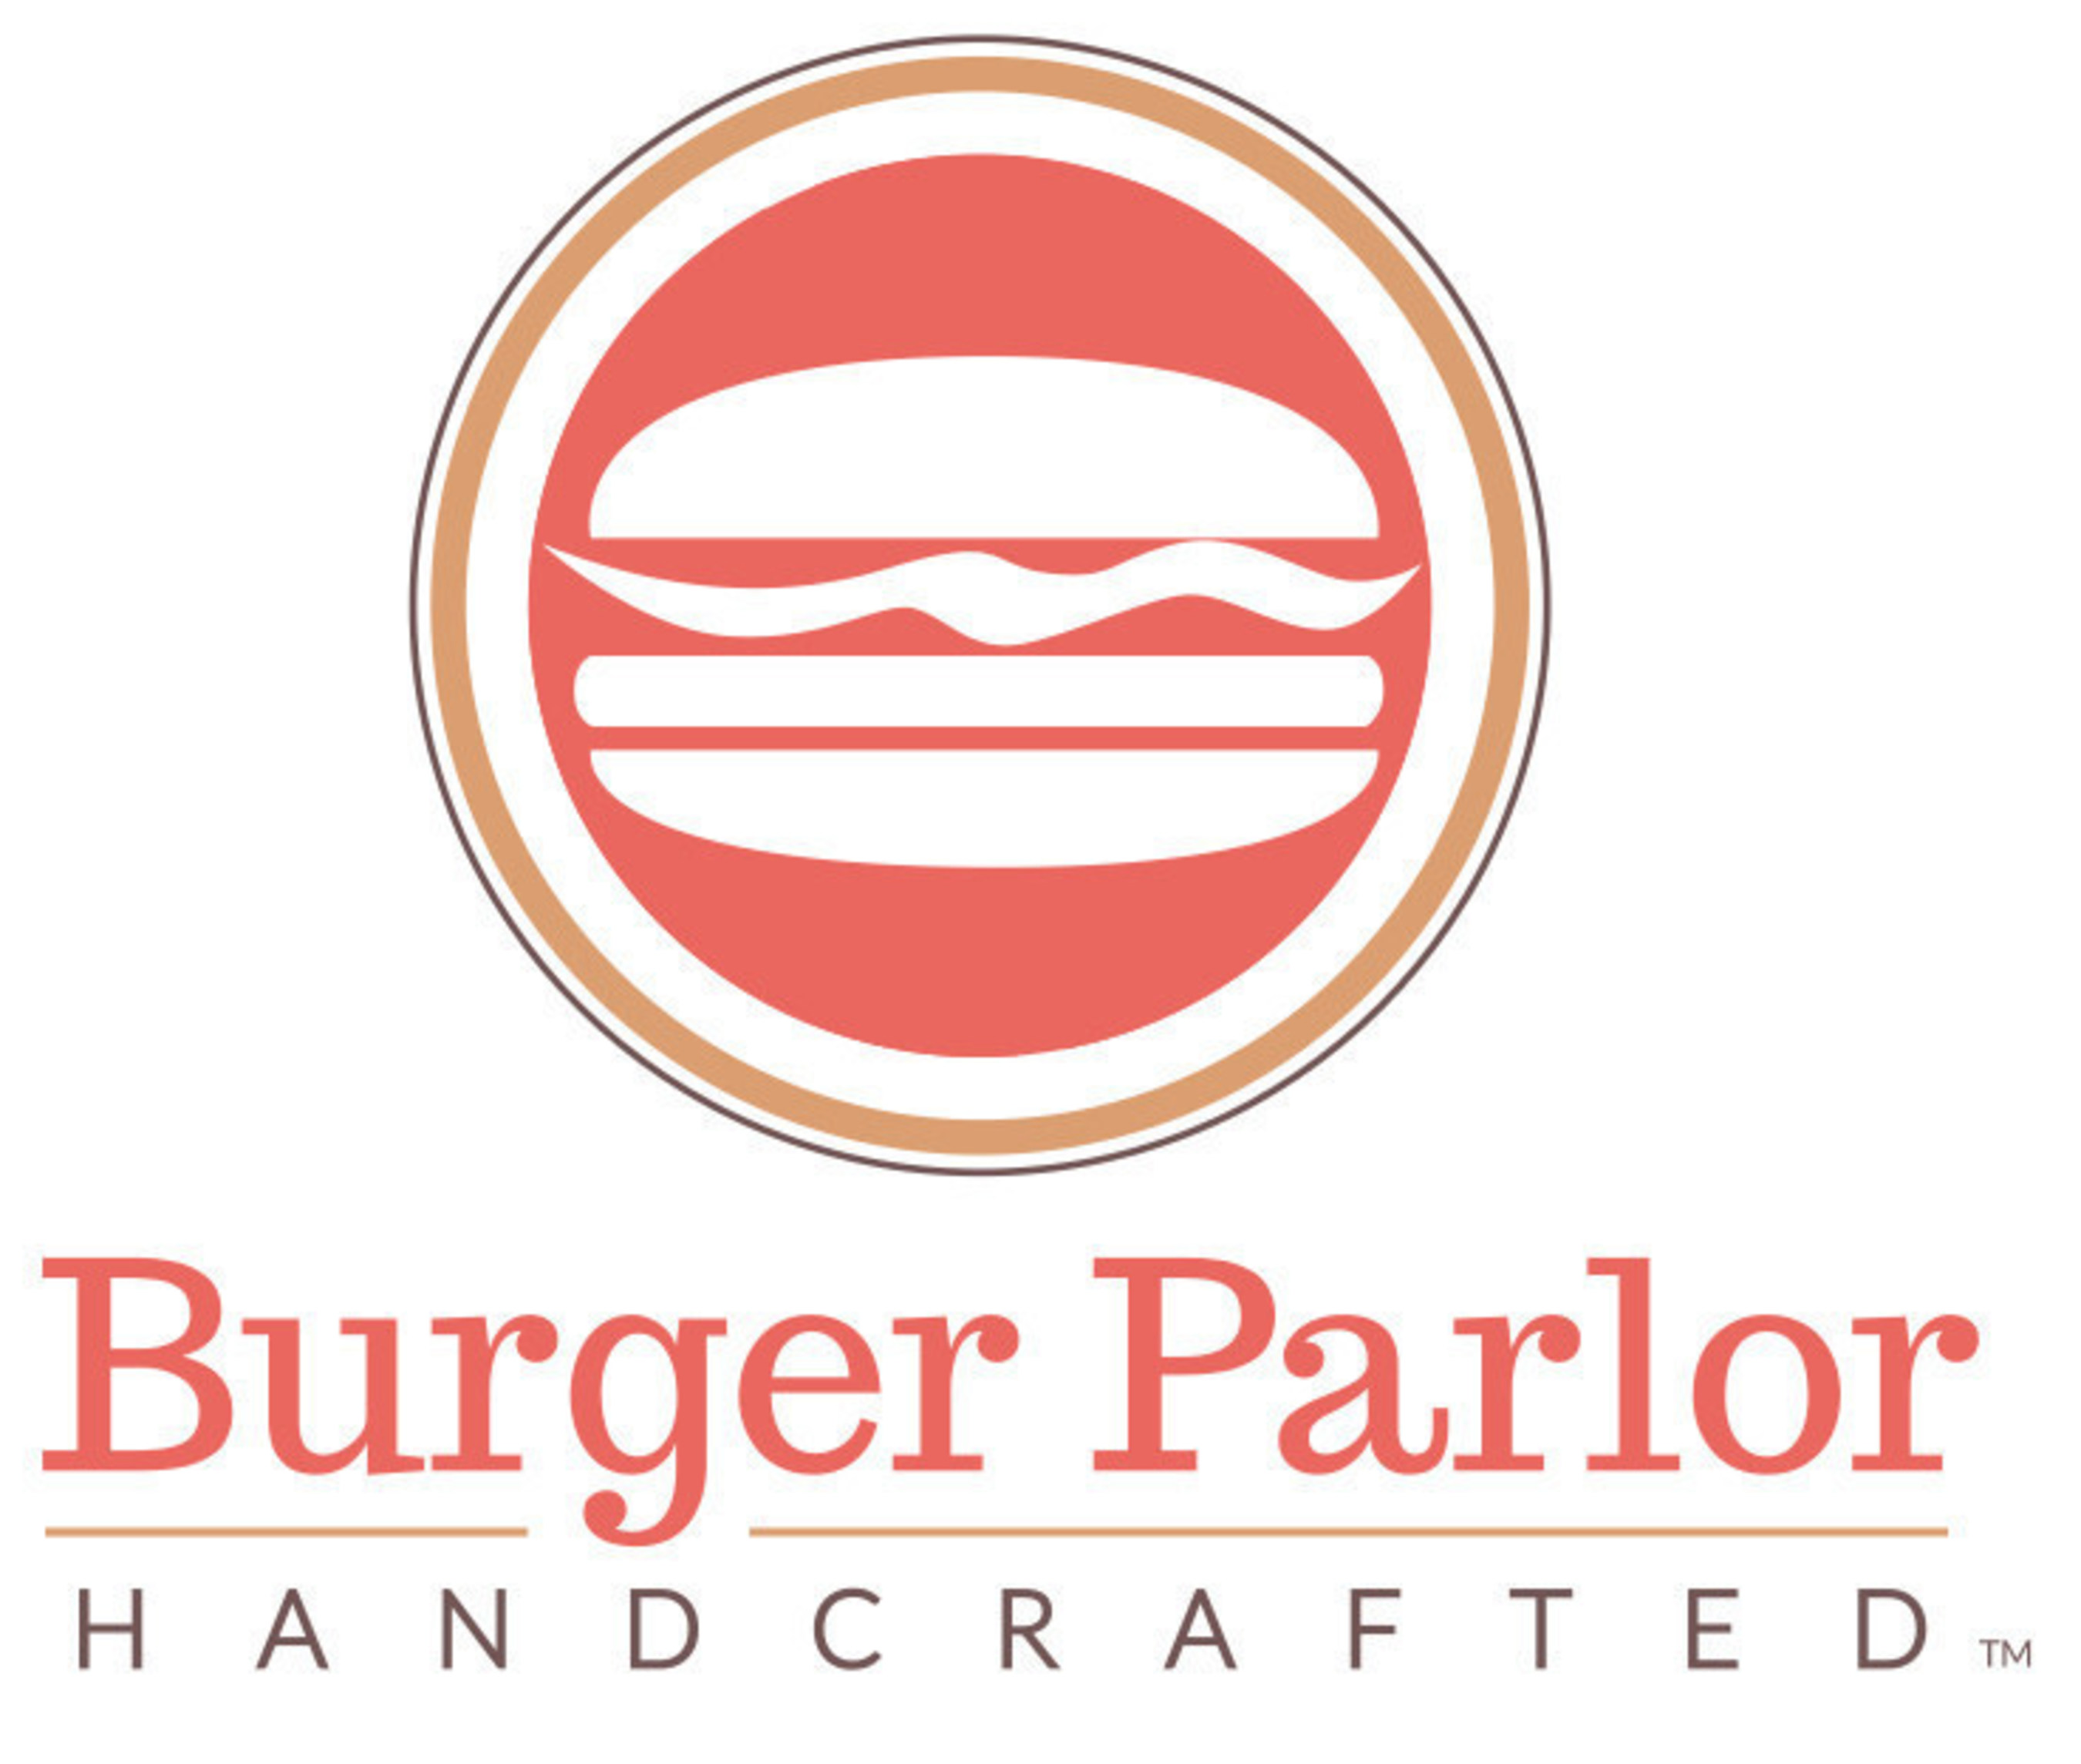 Burger Parlor, the first pop-up restaurant to go brick and mortar, is adding a second location to its portfolio. The new Old Towne Orange location will feature many of the same menu favorites as the Fullerton restaurant, as well as expanded tap list and a few new specials.